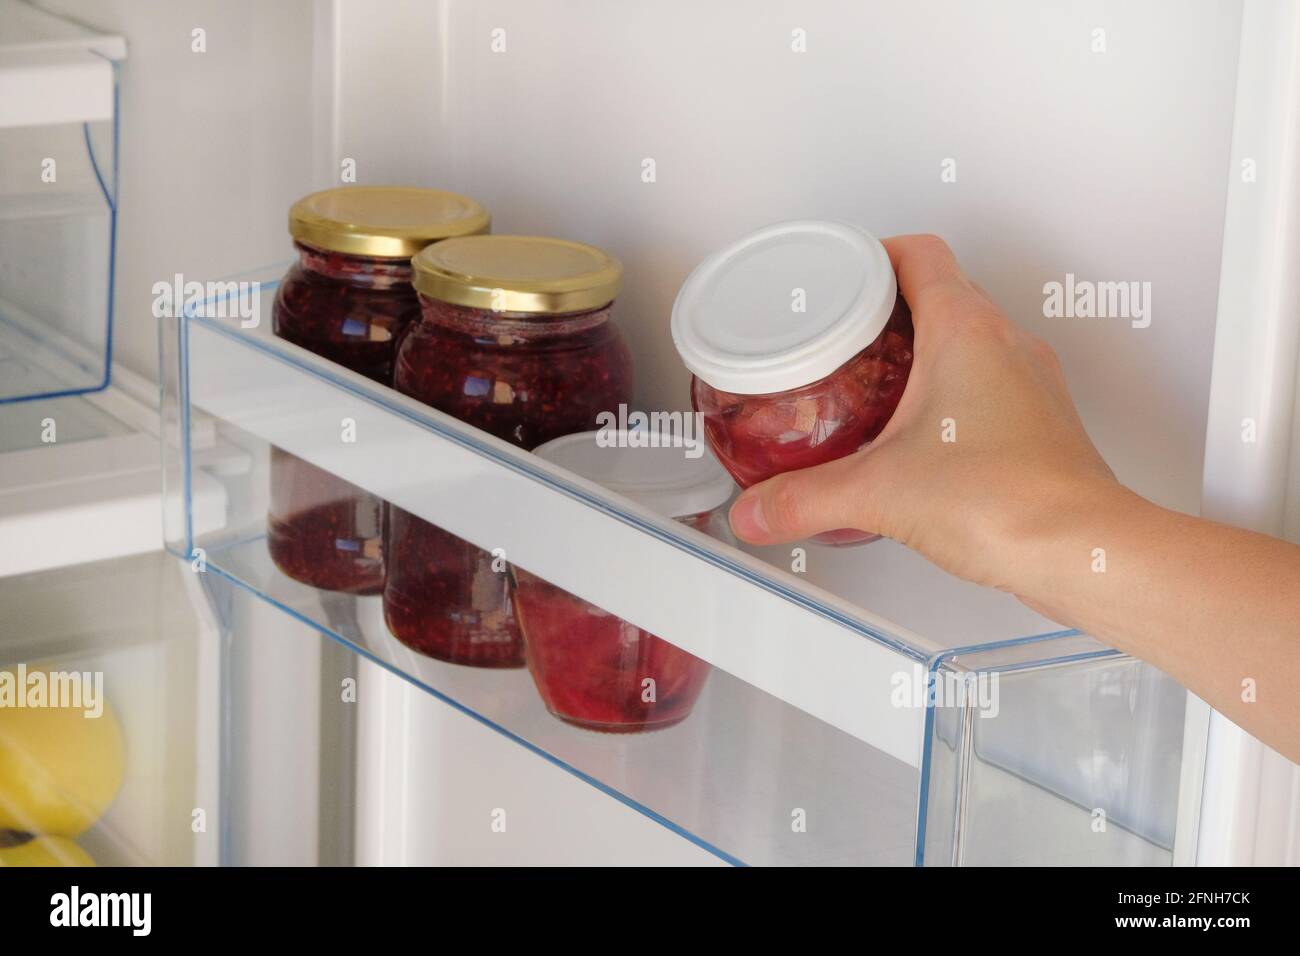 Glass Jars with raspberry and apple Jam on shelf in fridge. Female hand with a jar of red homemade jam. Fermented healthy foods stand in refrigerator. Stock Photo